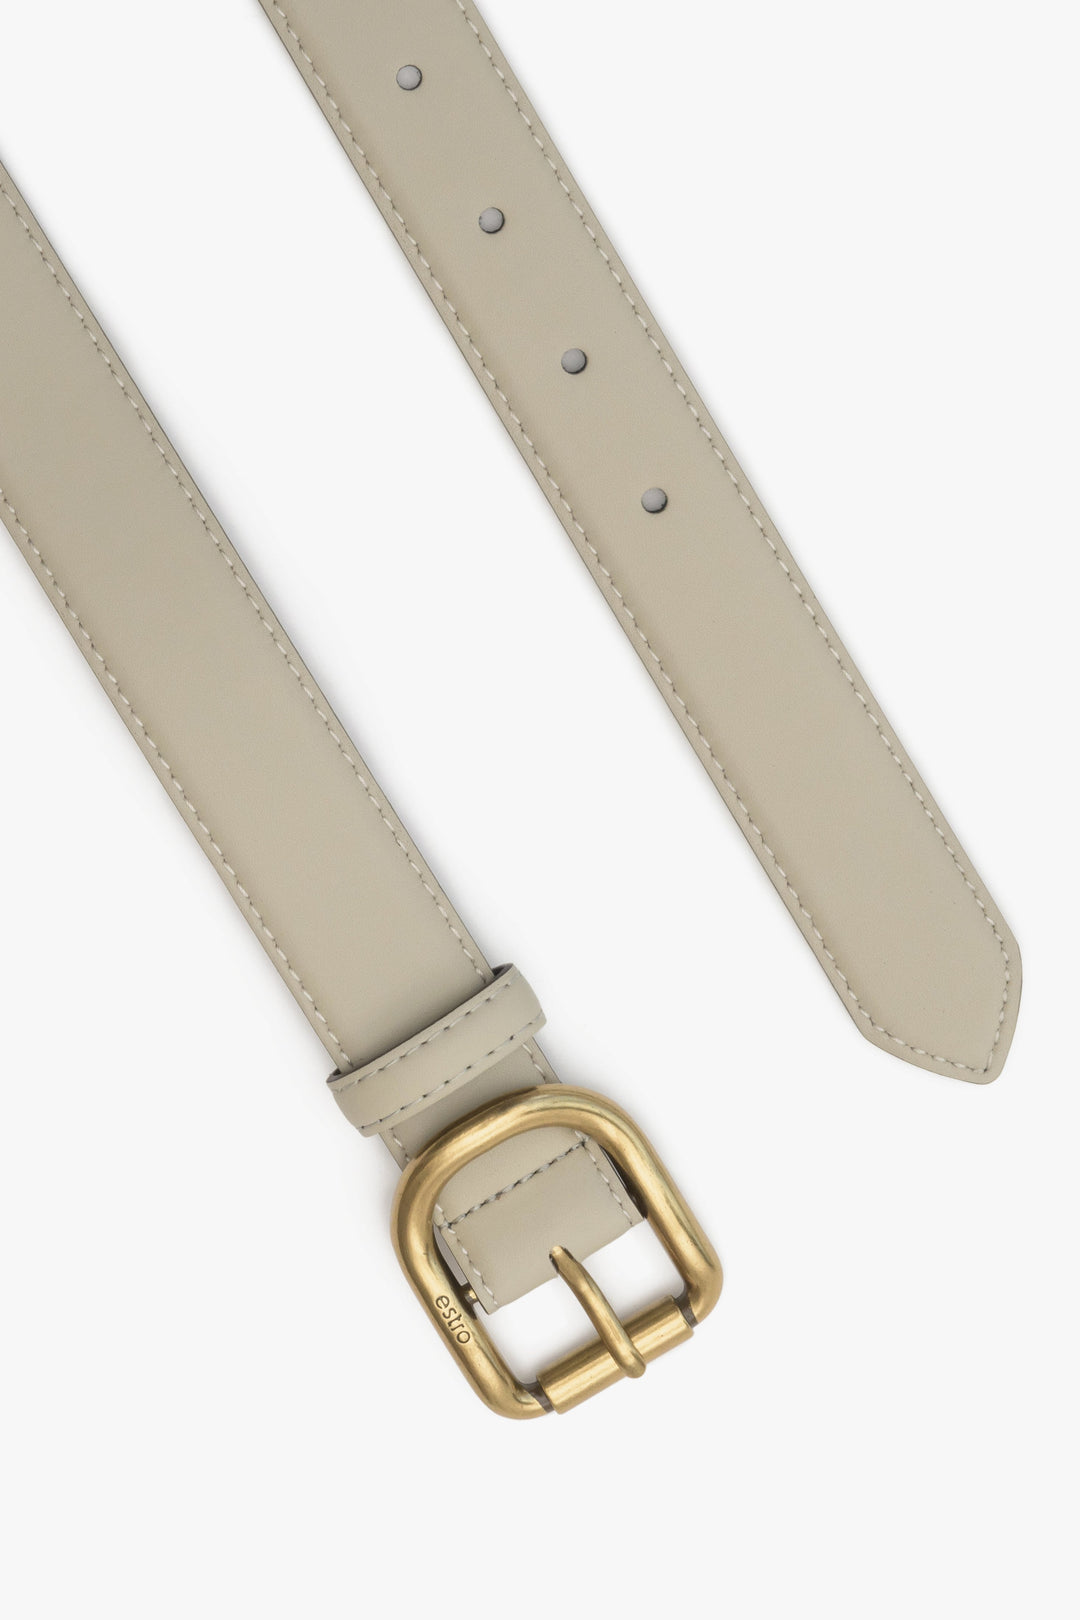 Beige Women's Leather Belt with Gold Buckle ER00113191.